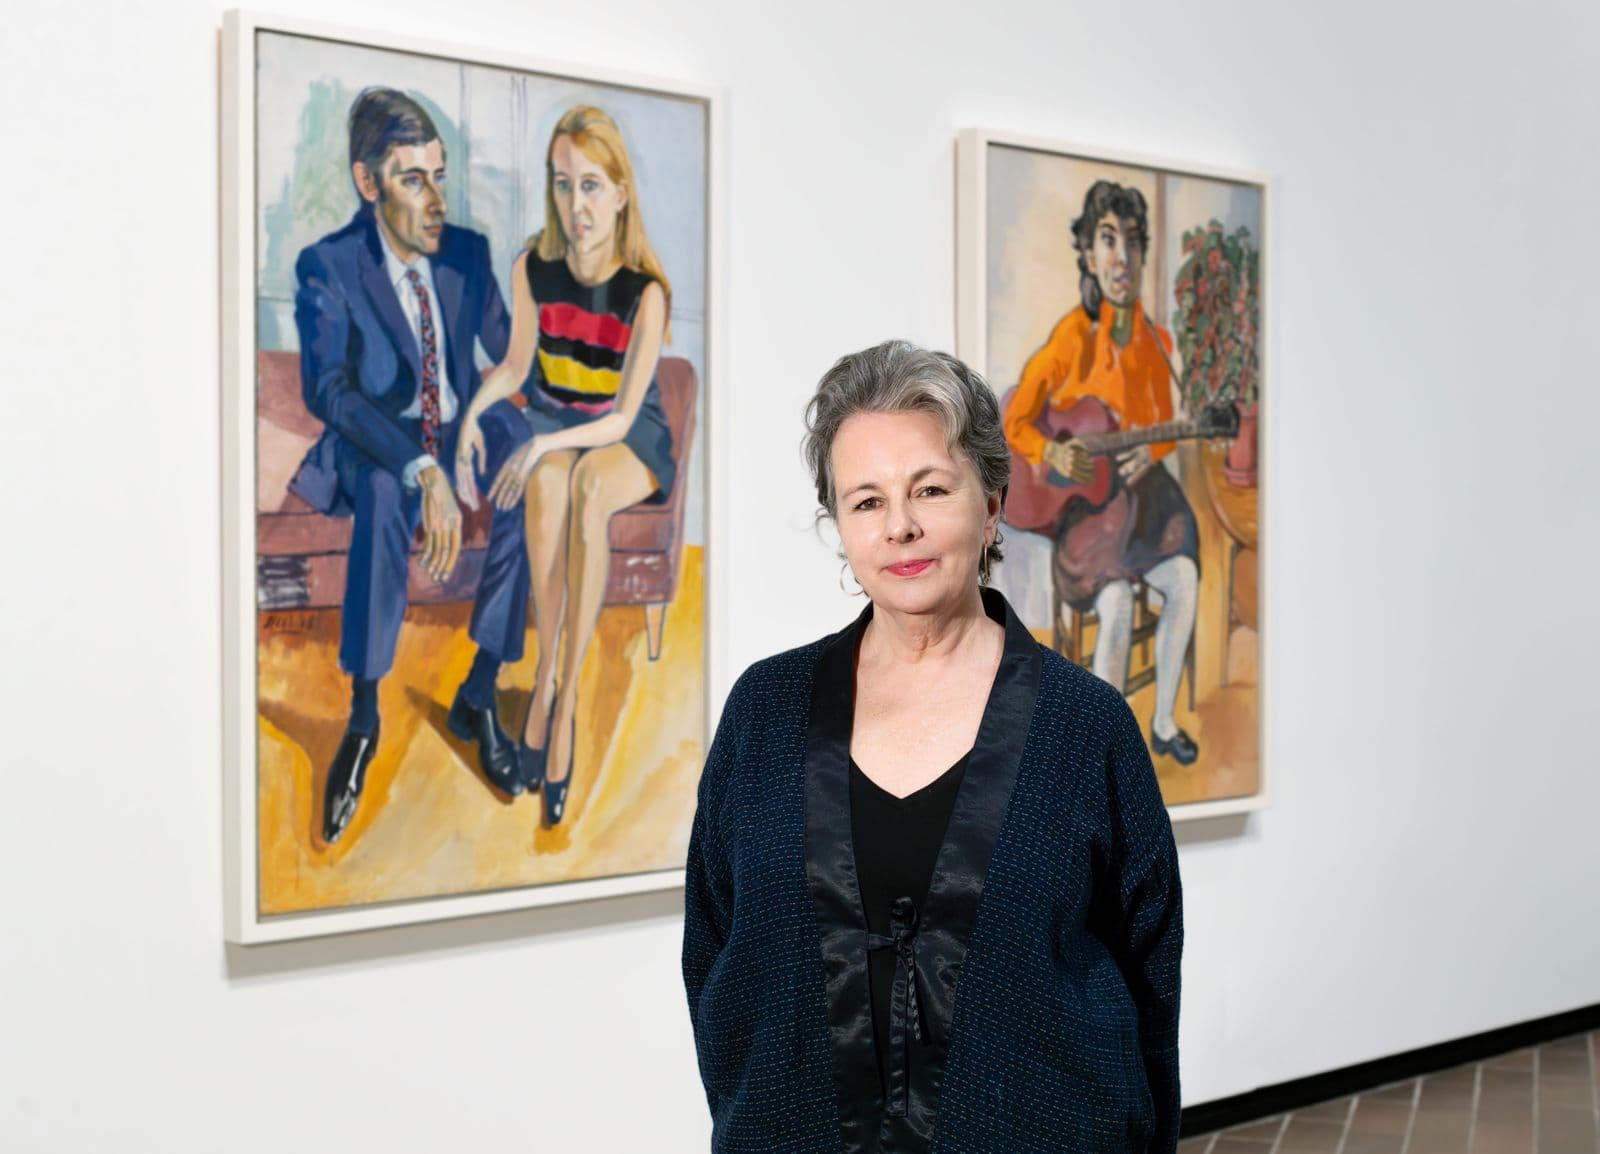 A picture of a woman in front of two works of art.